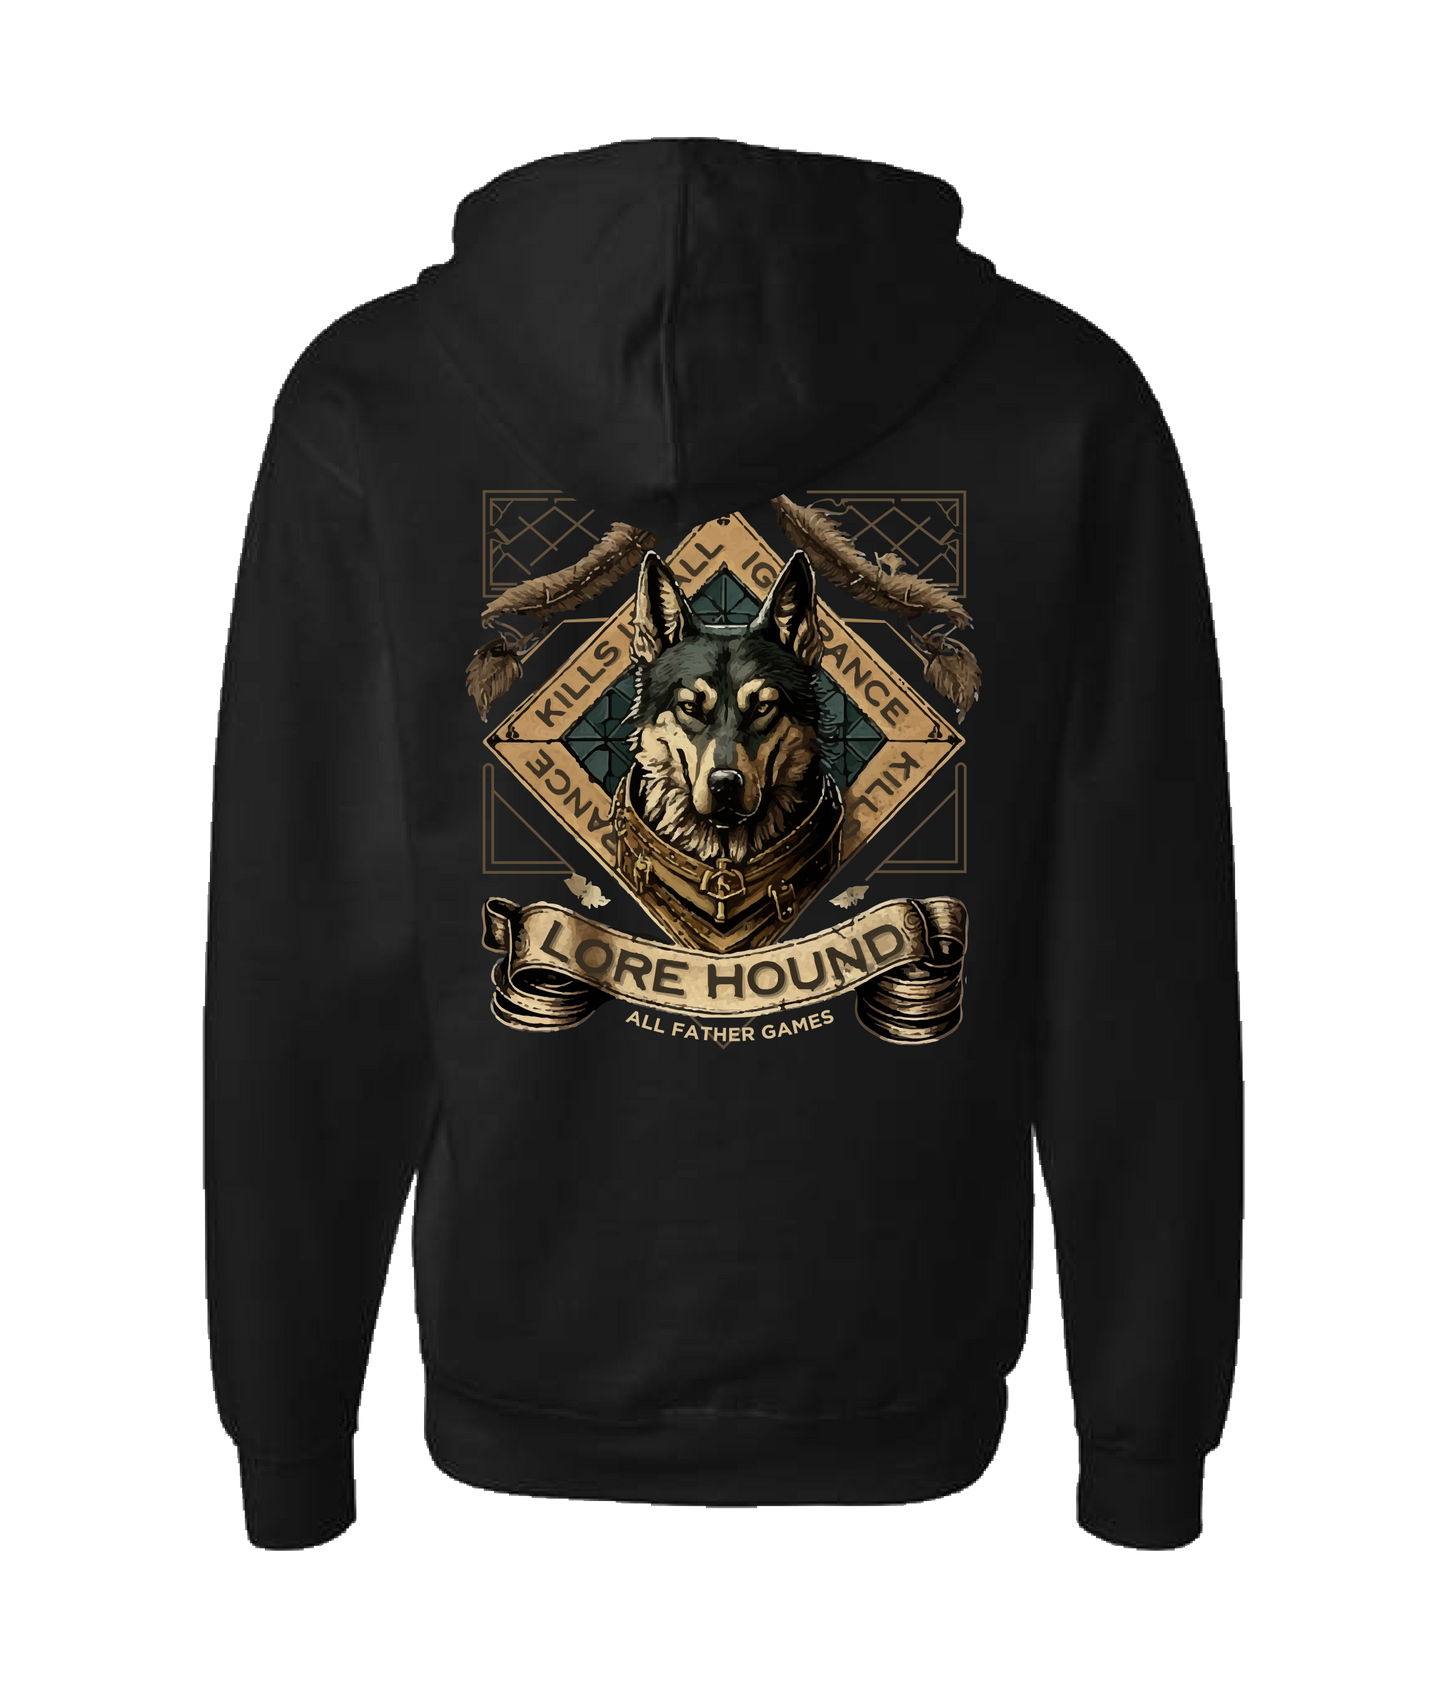 All Father Games - LORE HOUND - Black Zip Up Hoodie